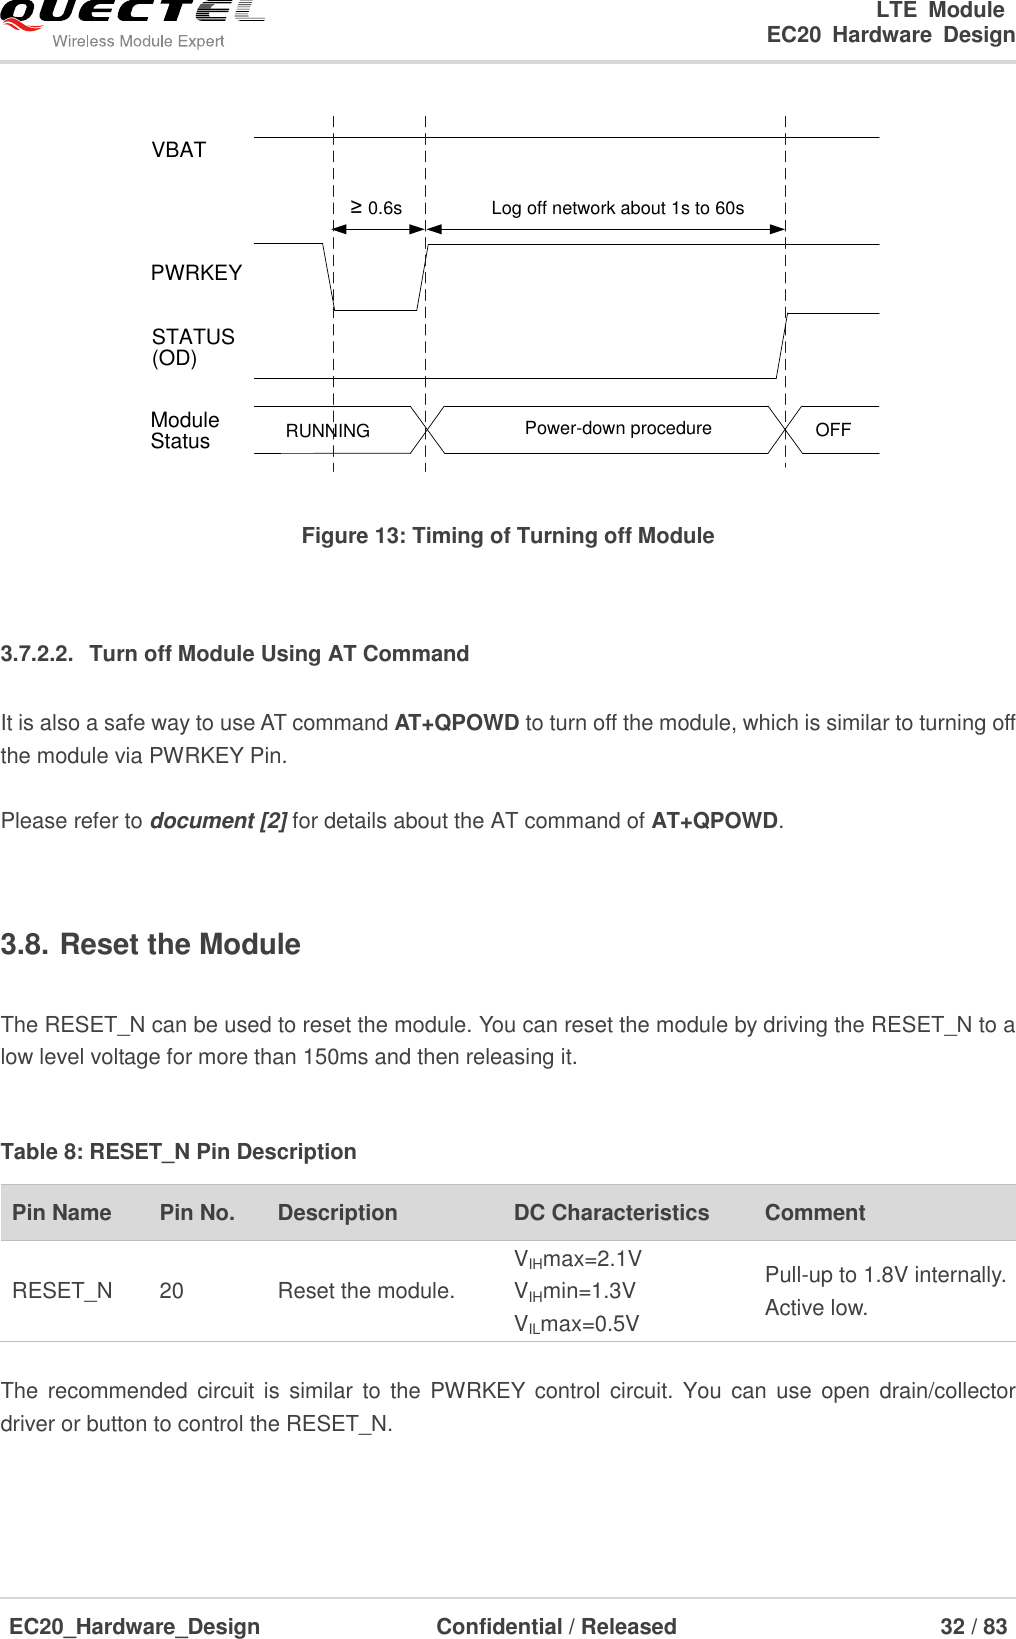                                                                        LTE  Module                                                                   EC20  Hardware  Design  EC20_Hardware_Design                  Confidential / Released                            32 / 83     VBATPWRKEYLog off network about 1s to 60s≥ 0.6sRUNNING Power-down procedure OFFModuleStatusSTATUS(OD) Figure 13: Timing of Turning off Module  3.7.2.2.  Turn off Module Using AT Command It is also a safe way to use AT command AT+QPOWD to turn off the module, which is similar to turning off the module via PWRKEY Pin.  Please refer to document [2] for details about the AT command of AT+QPOWD.  3.8. Reset the Module  The RESET_N can be used to reset the module. You can reset the module by driving the RESET_N to a low level voltage for more than 150ms and then releasing it.  Table 8: RESET_N Pin Description Pin Name   Pin No. Description DC Characteristics Comment RESET_N 20 Reset the module. VIHmax=2.1V VIHmin=1.3V VILmax=0.5V Pull-up to 1.8V internally.   Active low.  The  recommended circuit is  similar  to  the  PWRKEY  control  circuit. You can  use  open  drain/collector driver or button to control the RESET_N. 